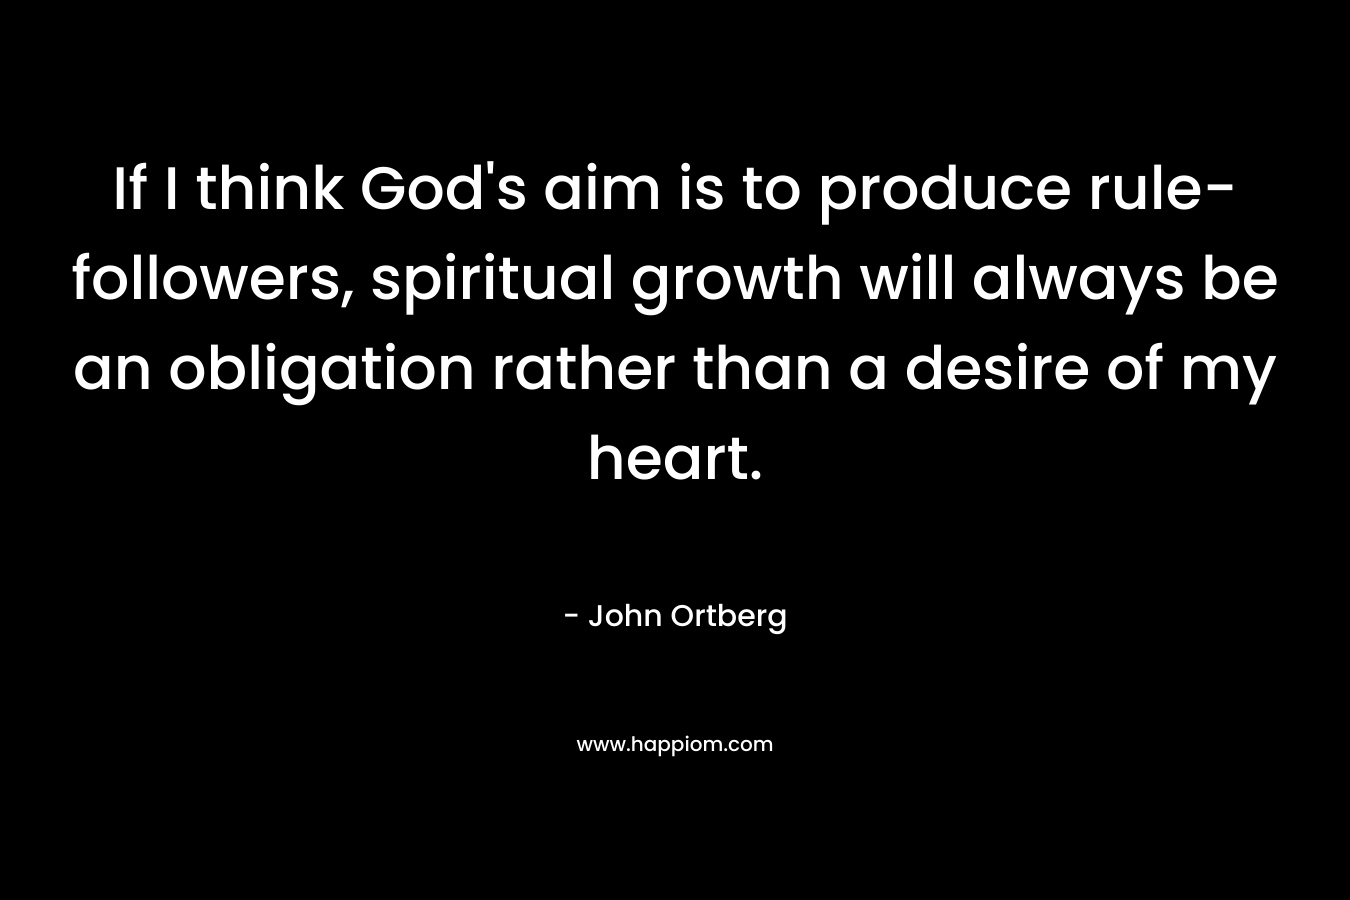 If I think God's aim is to produce rule-followers, spiritual growth will always be an obligation rather than a desire of my heart.